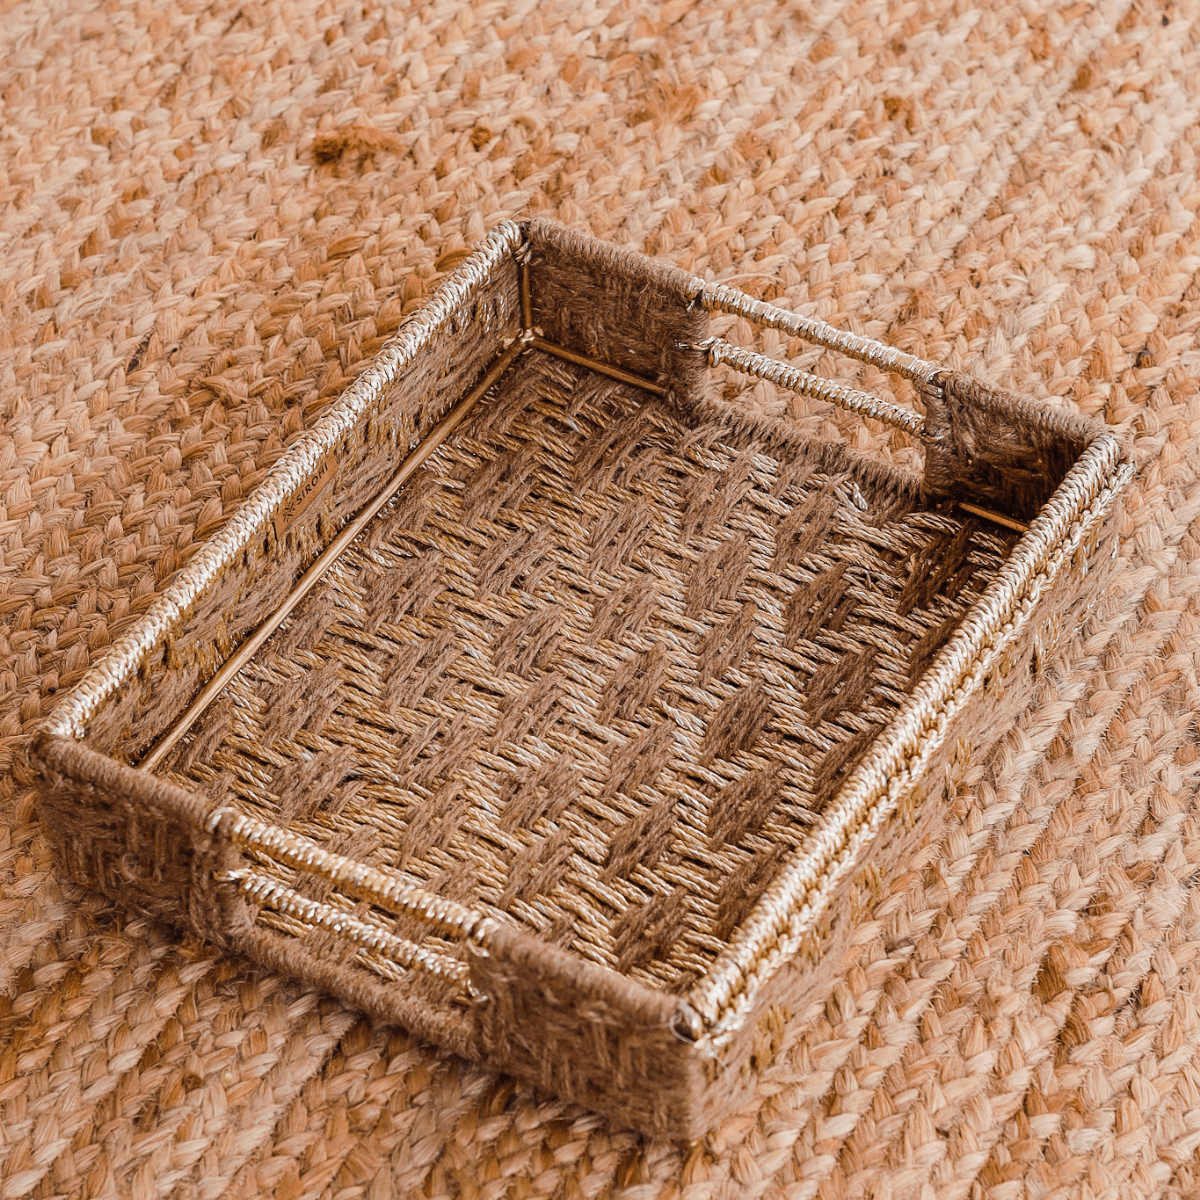 Sona Upcycled Plastic Tray - Sirohi.org - Colour_Gold, Colour_White, purpose_decor, Purpose_Storage, Rope Material_Natural Jute Fibre, Rope Material_Plastic Waste